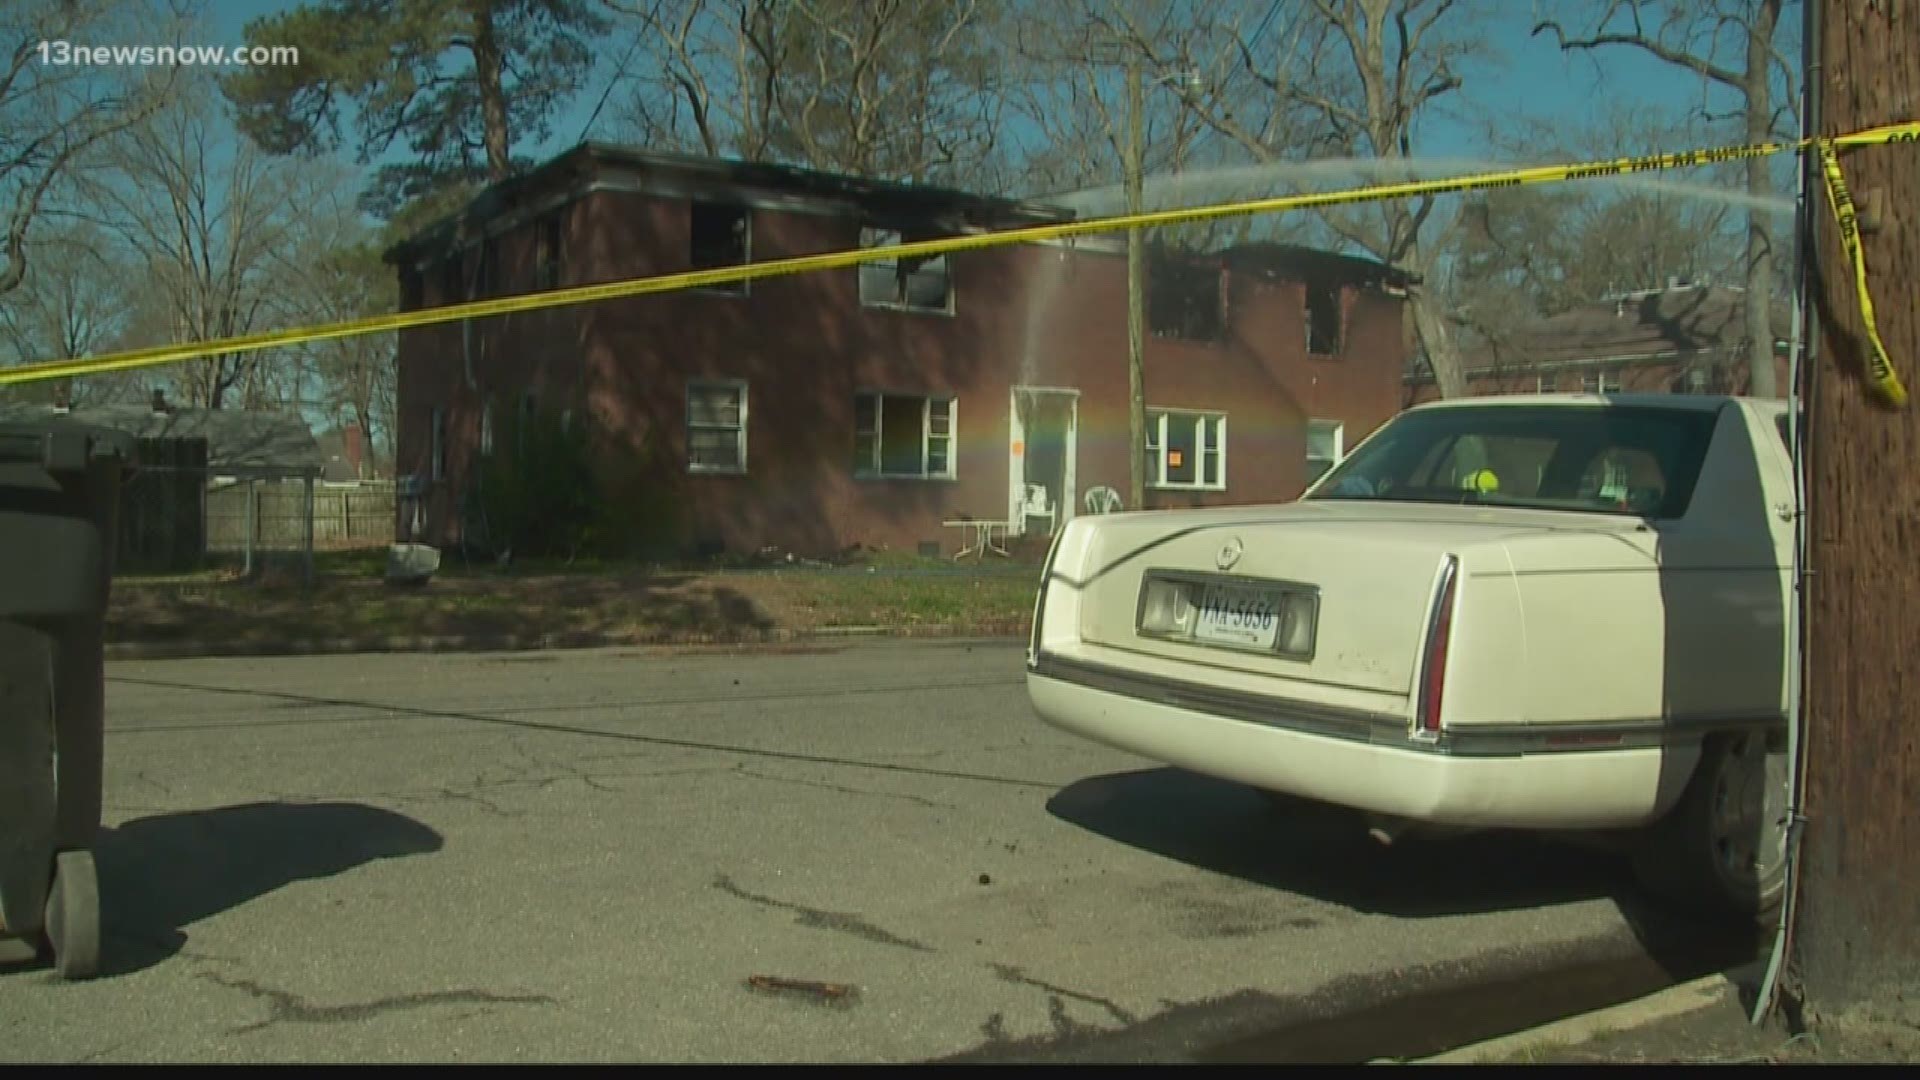 A 72-year-old woman died after a fire broke out in a Portsmouth apartment home early Thursday morning.